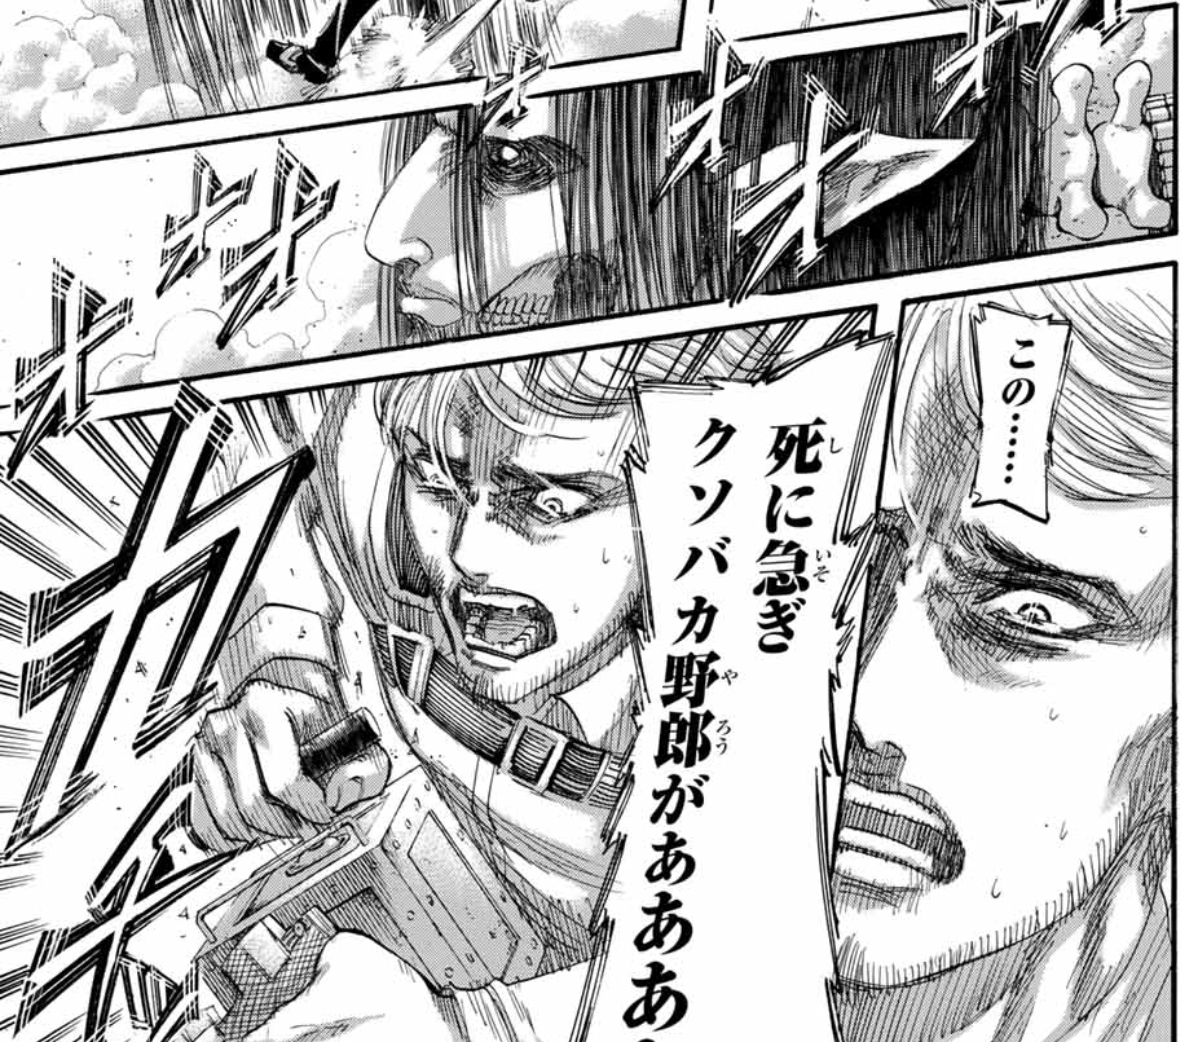 Attack On Titan Manga Meta Chapter 137 Review Hana S Blog Facebook comments manga fox comments newest oldest popular. attack on titan manga meta chapter 137